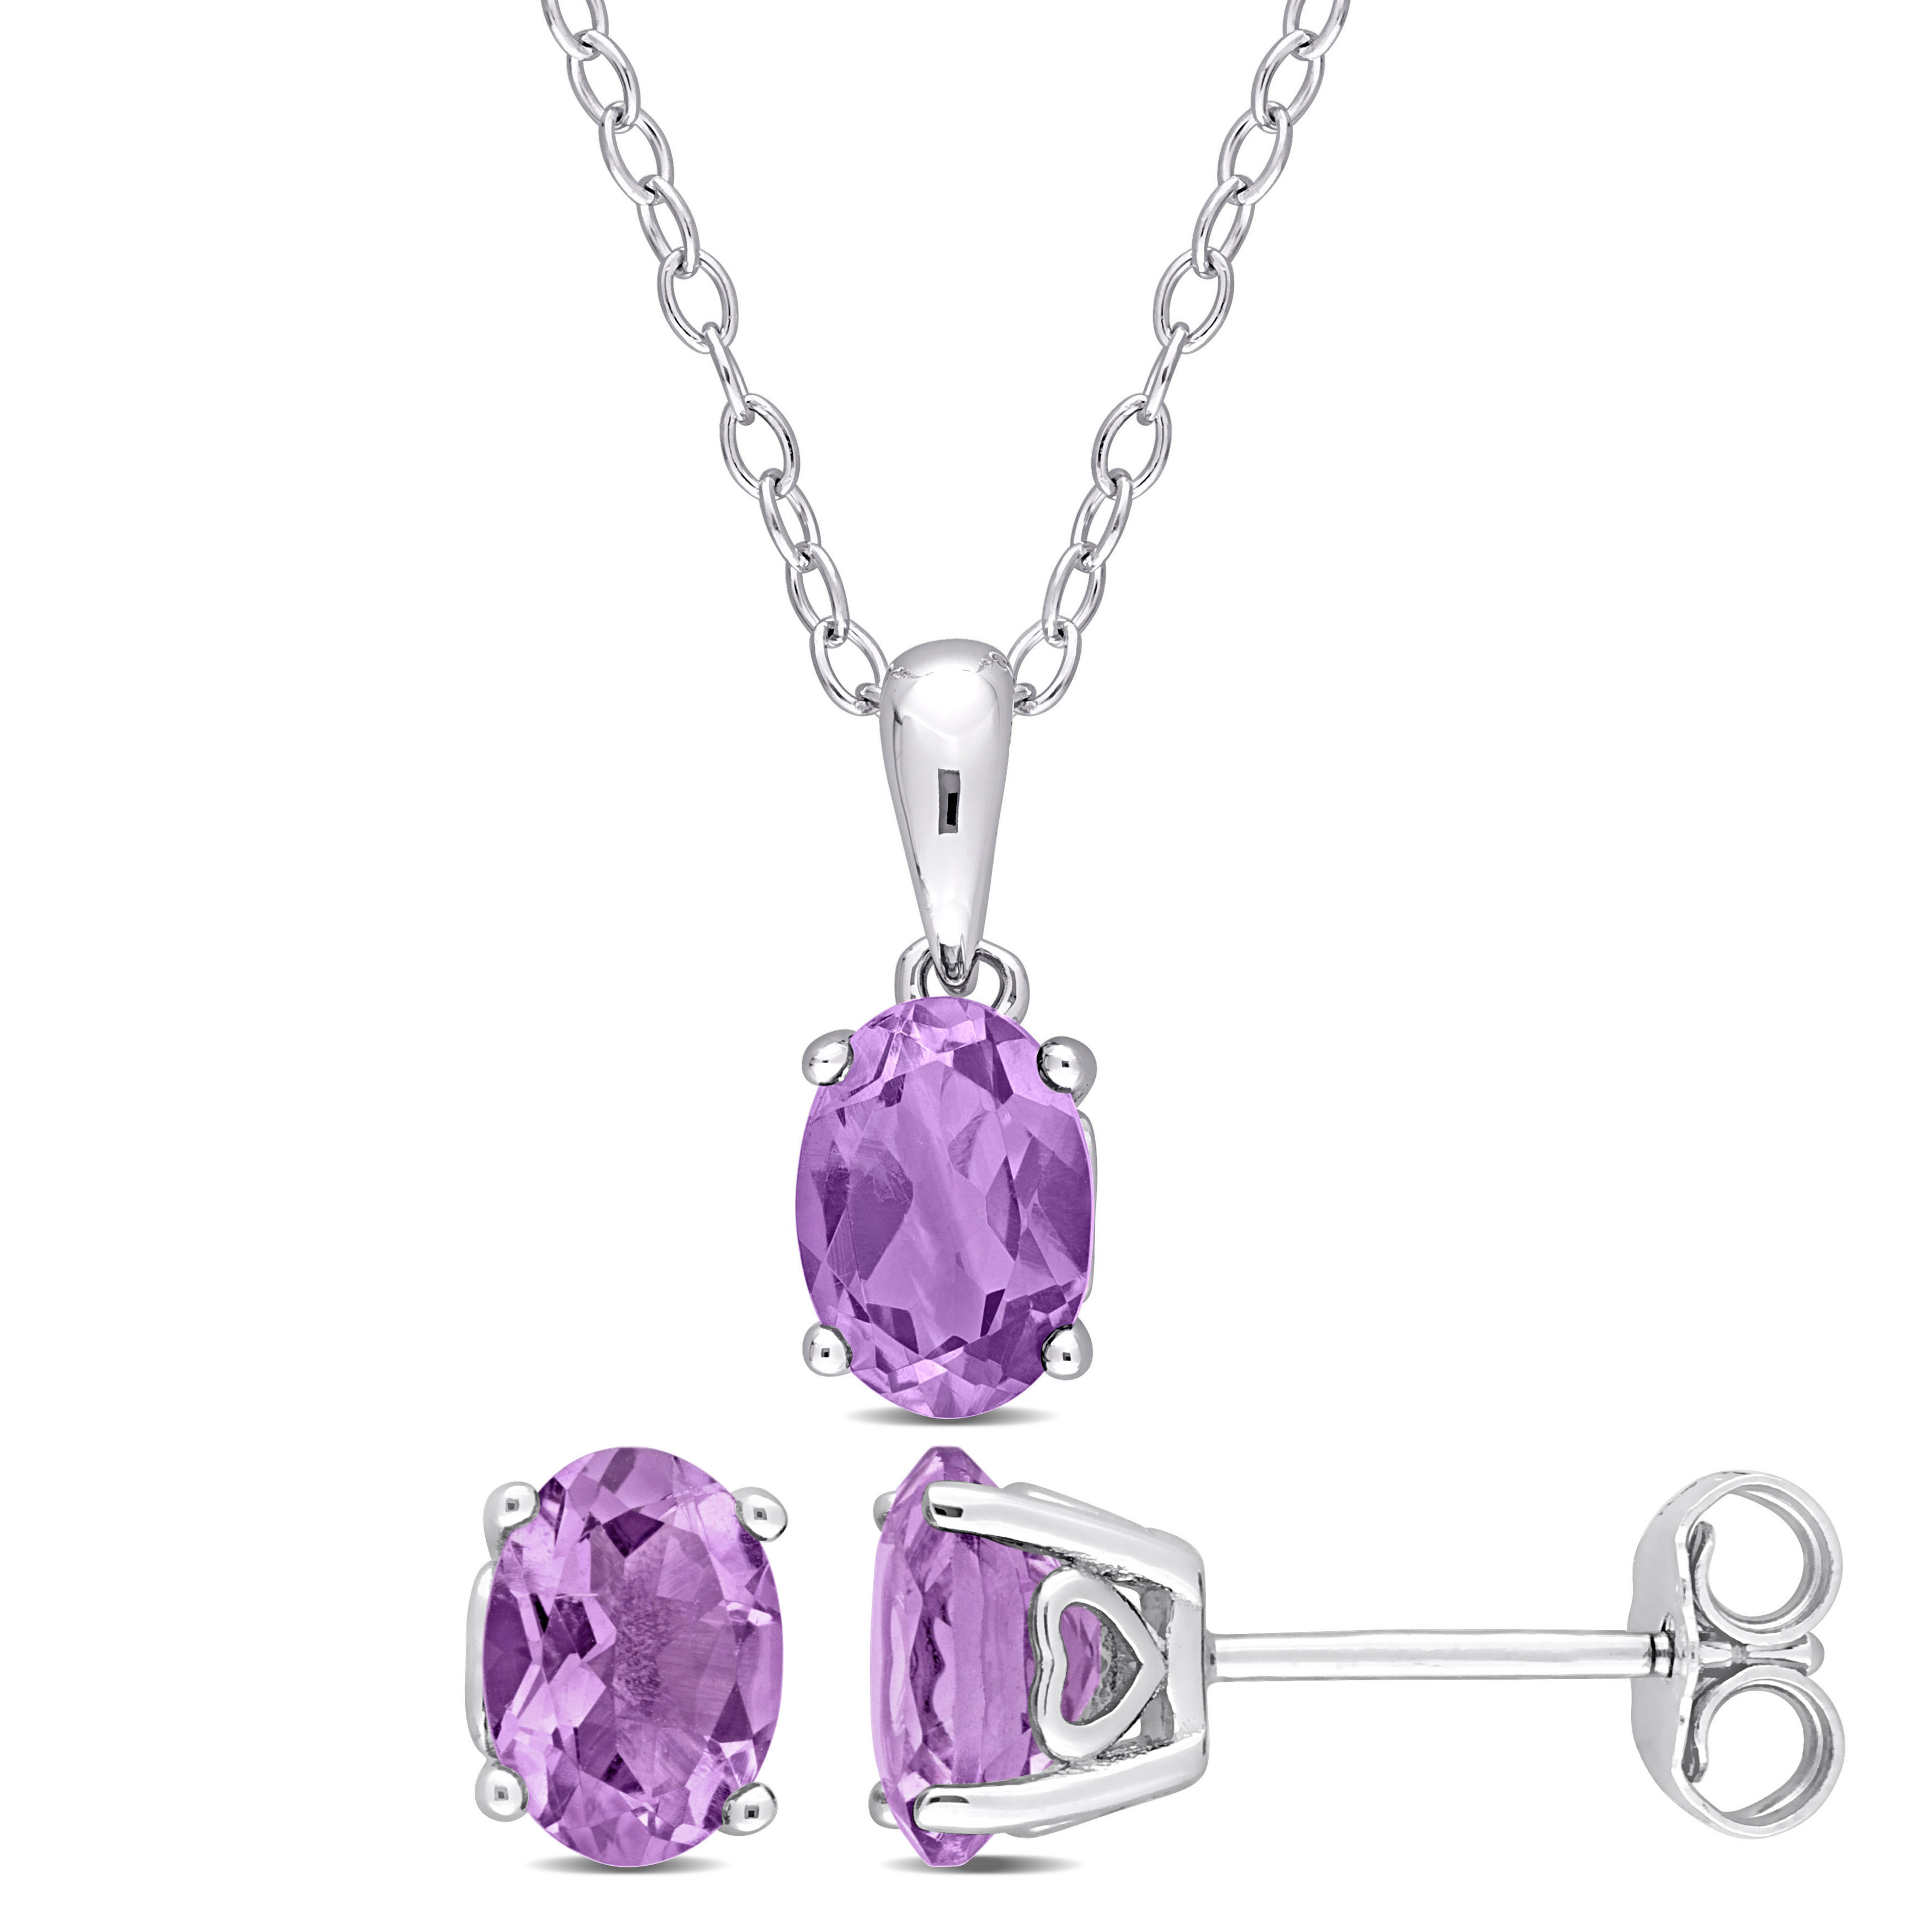 2 1/10 CT TGW Oval Amethyst 2-Piece Solitaire Pendant with Chain and Stud Earrings Set in Sterling Silver